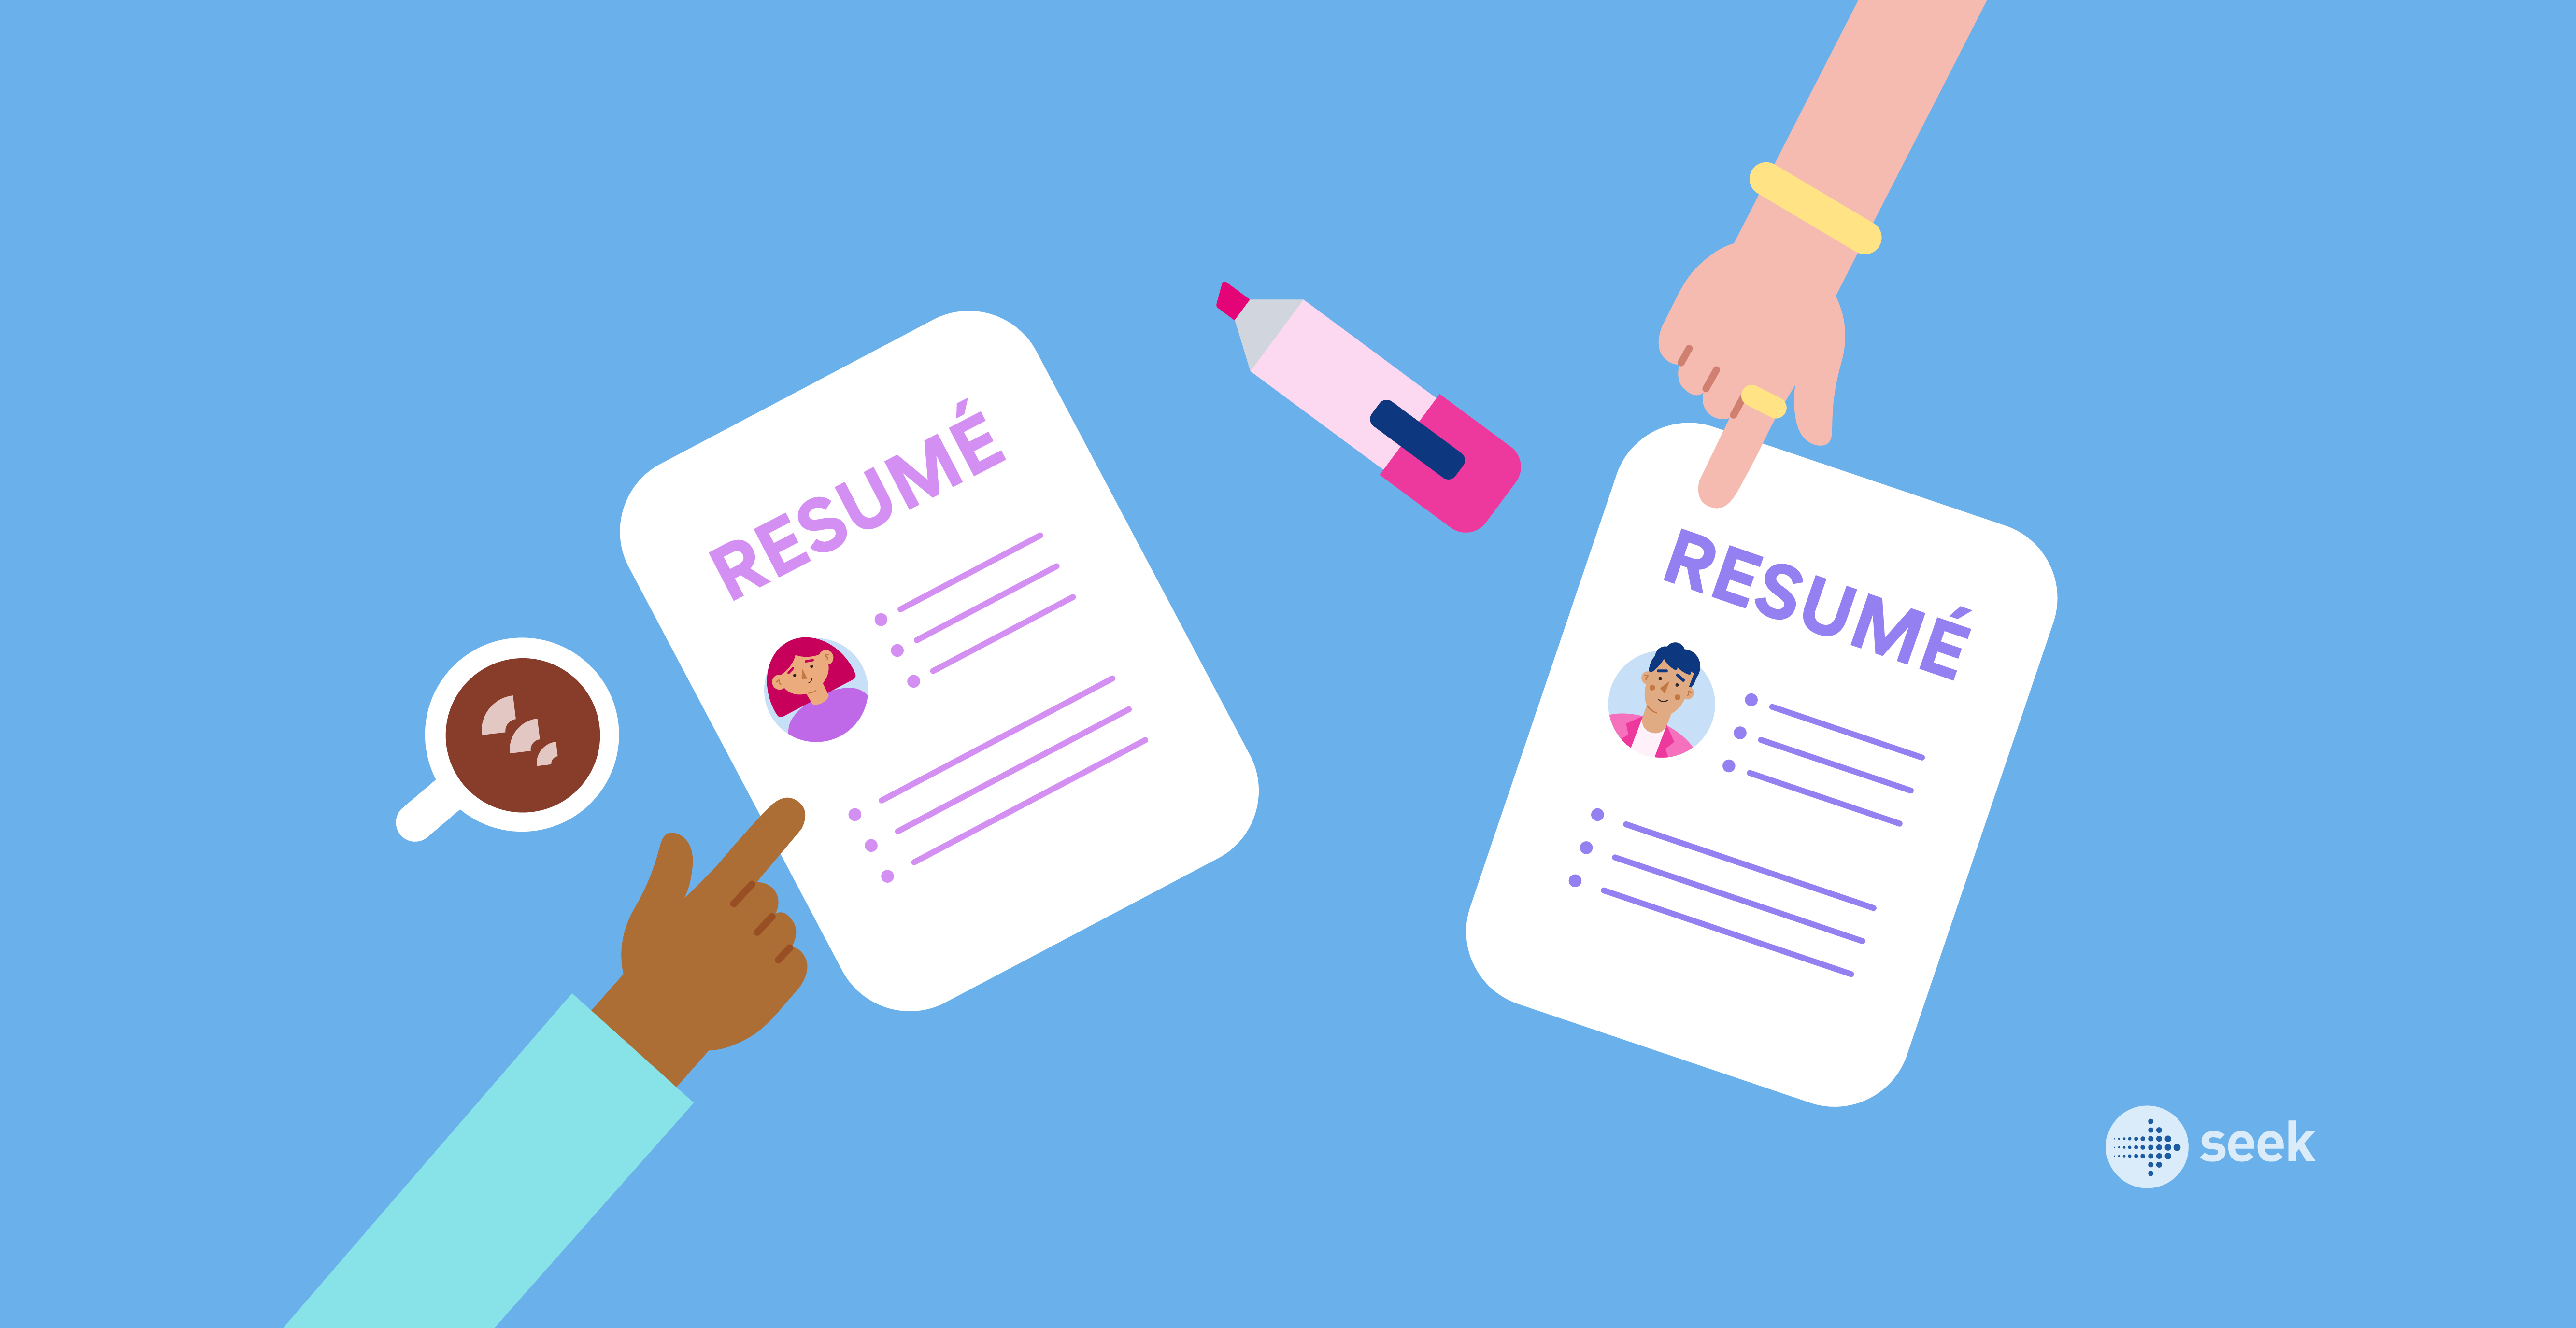 What are the different recruitment process steps? 